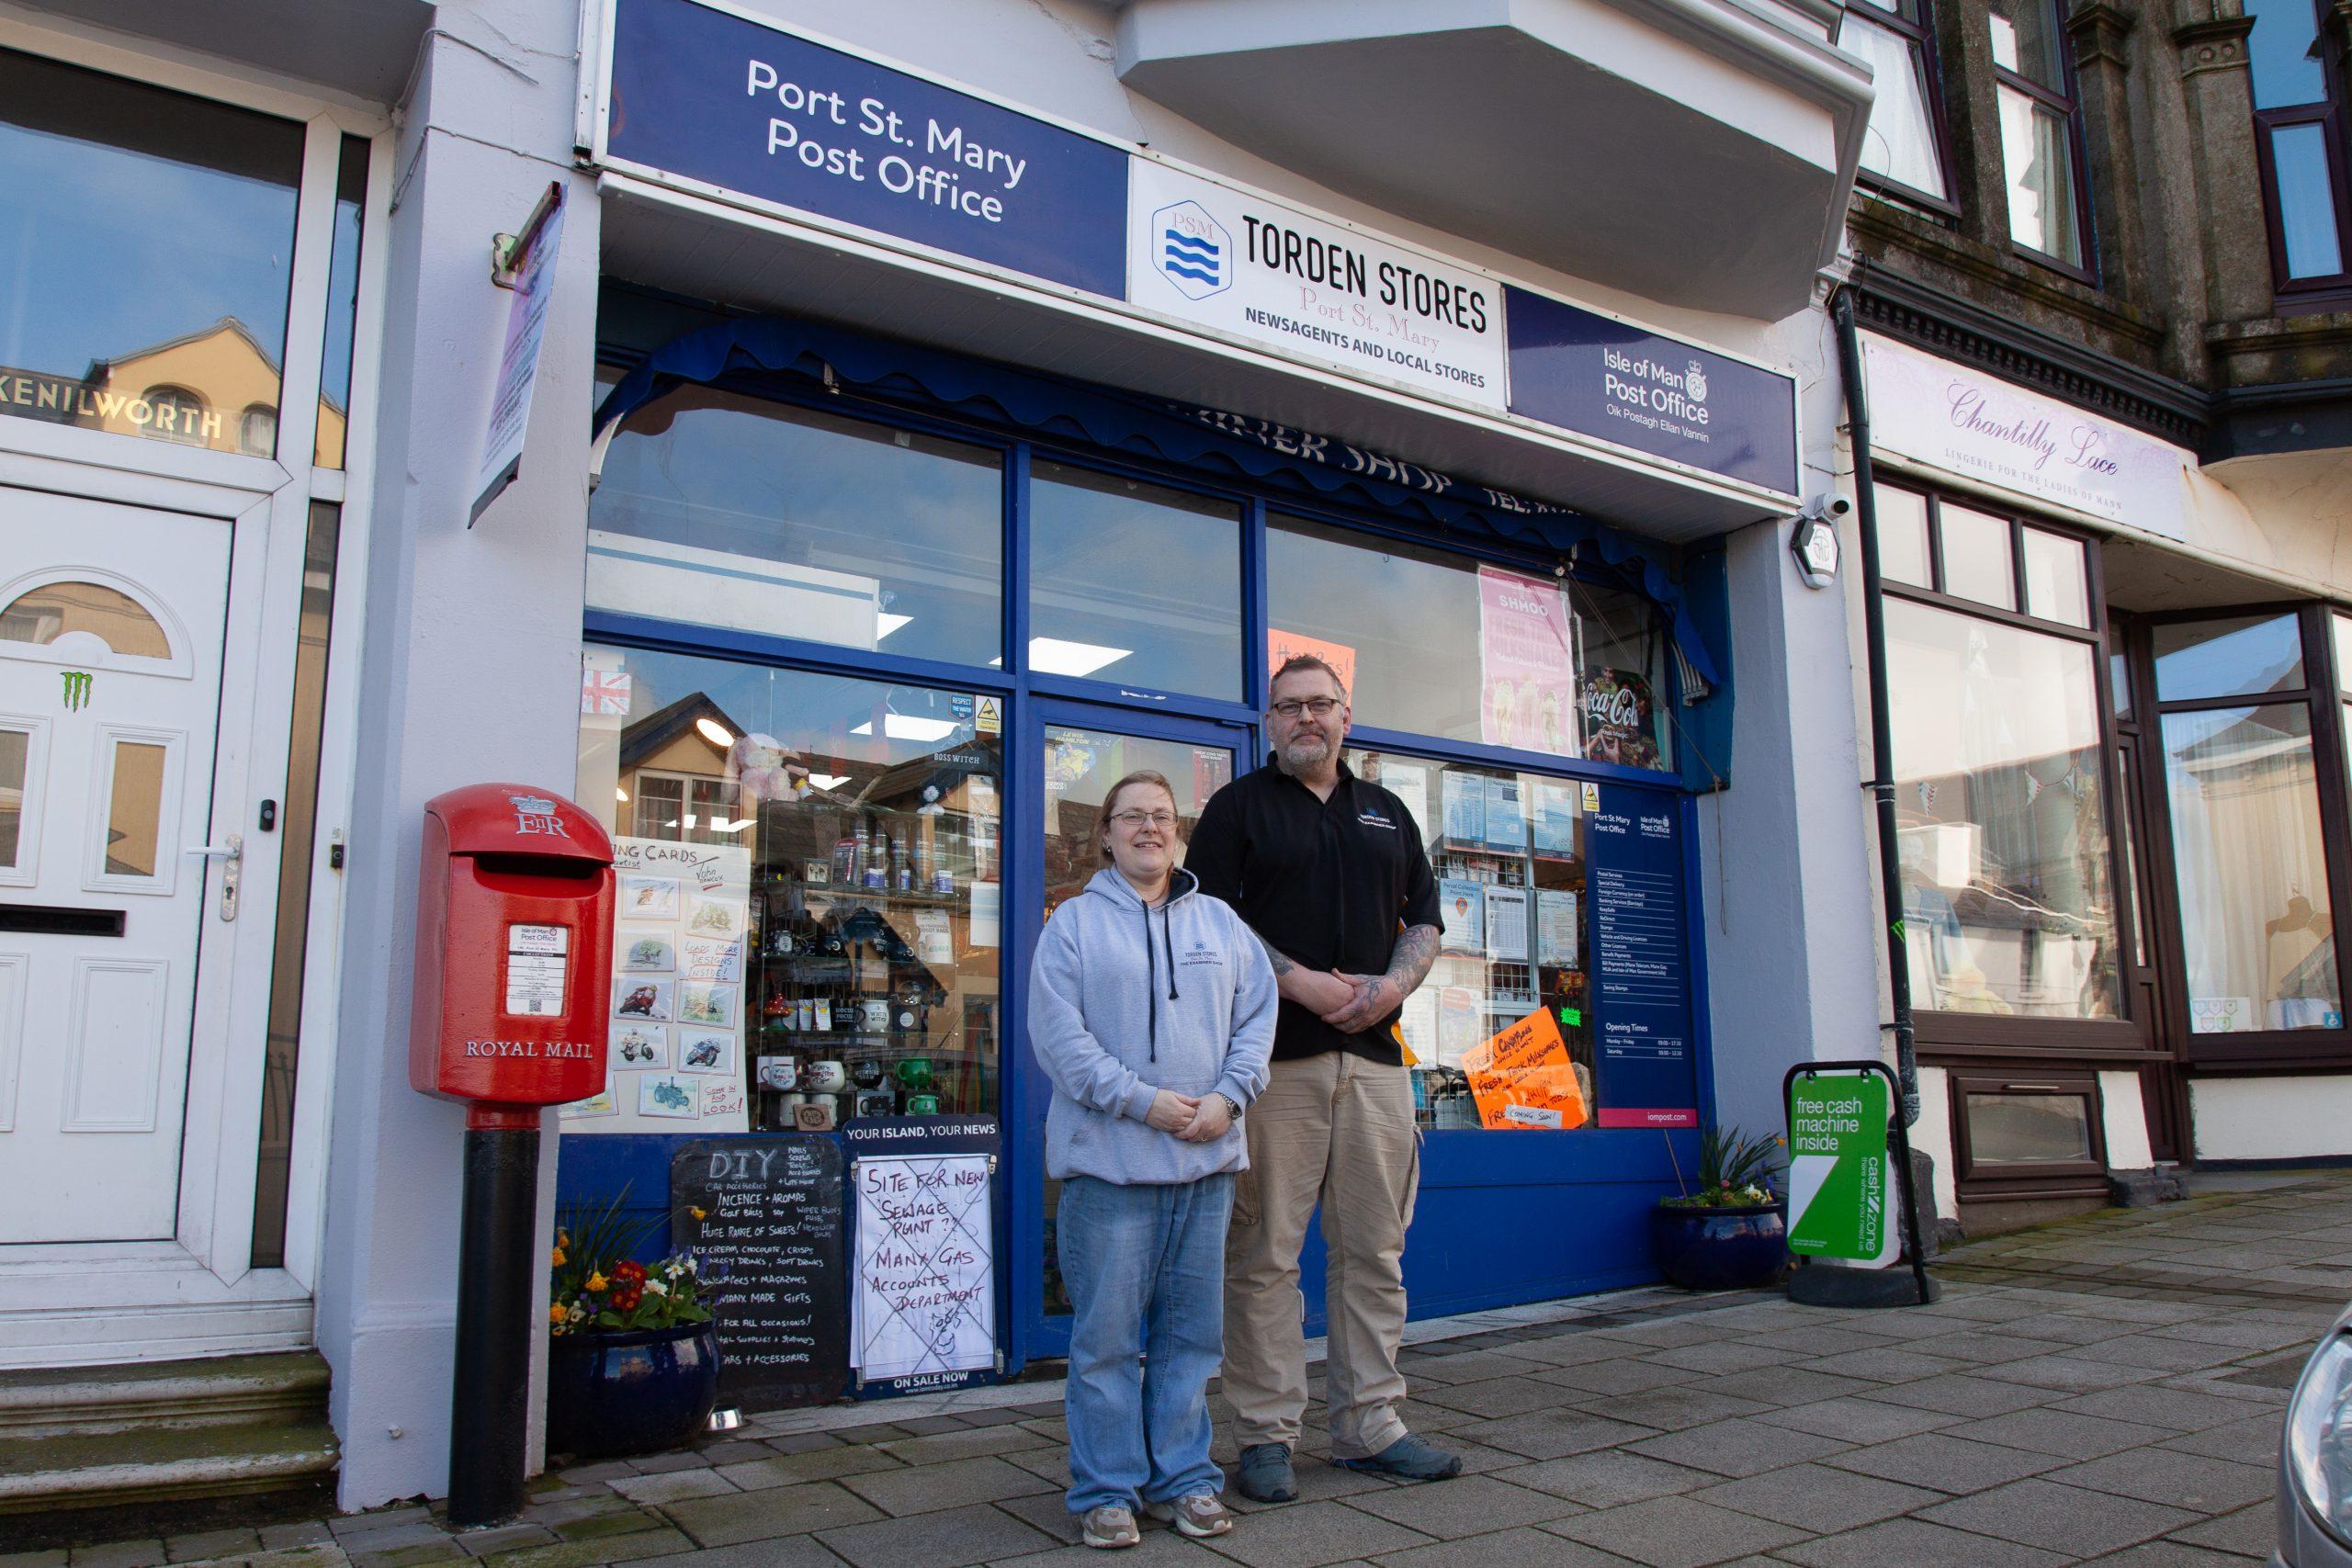 Torden Stores-Vicky East and David East